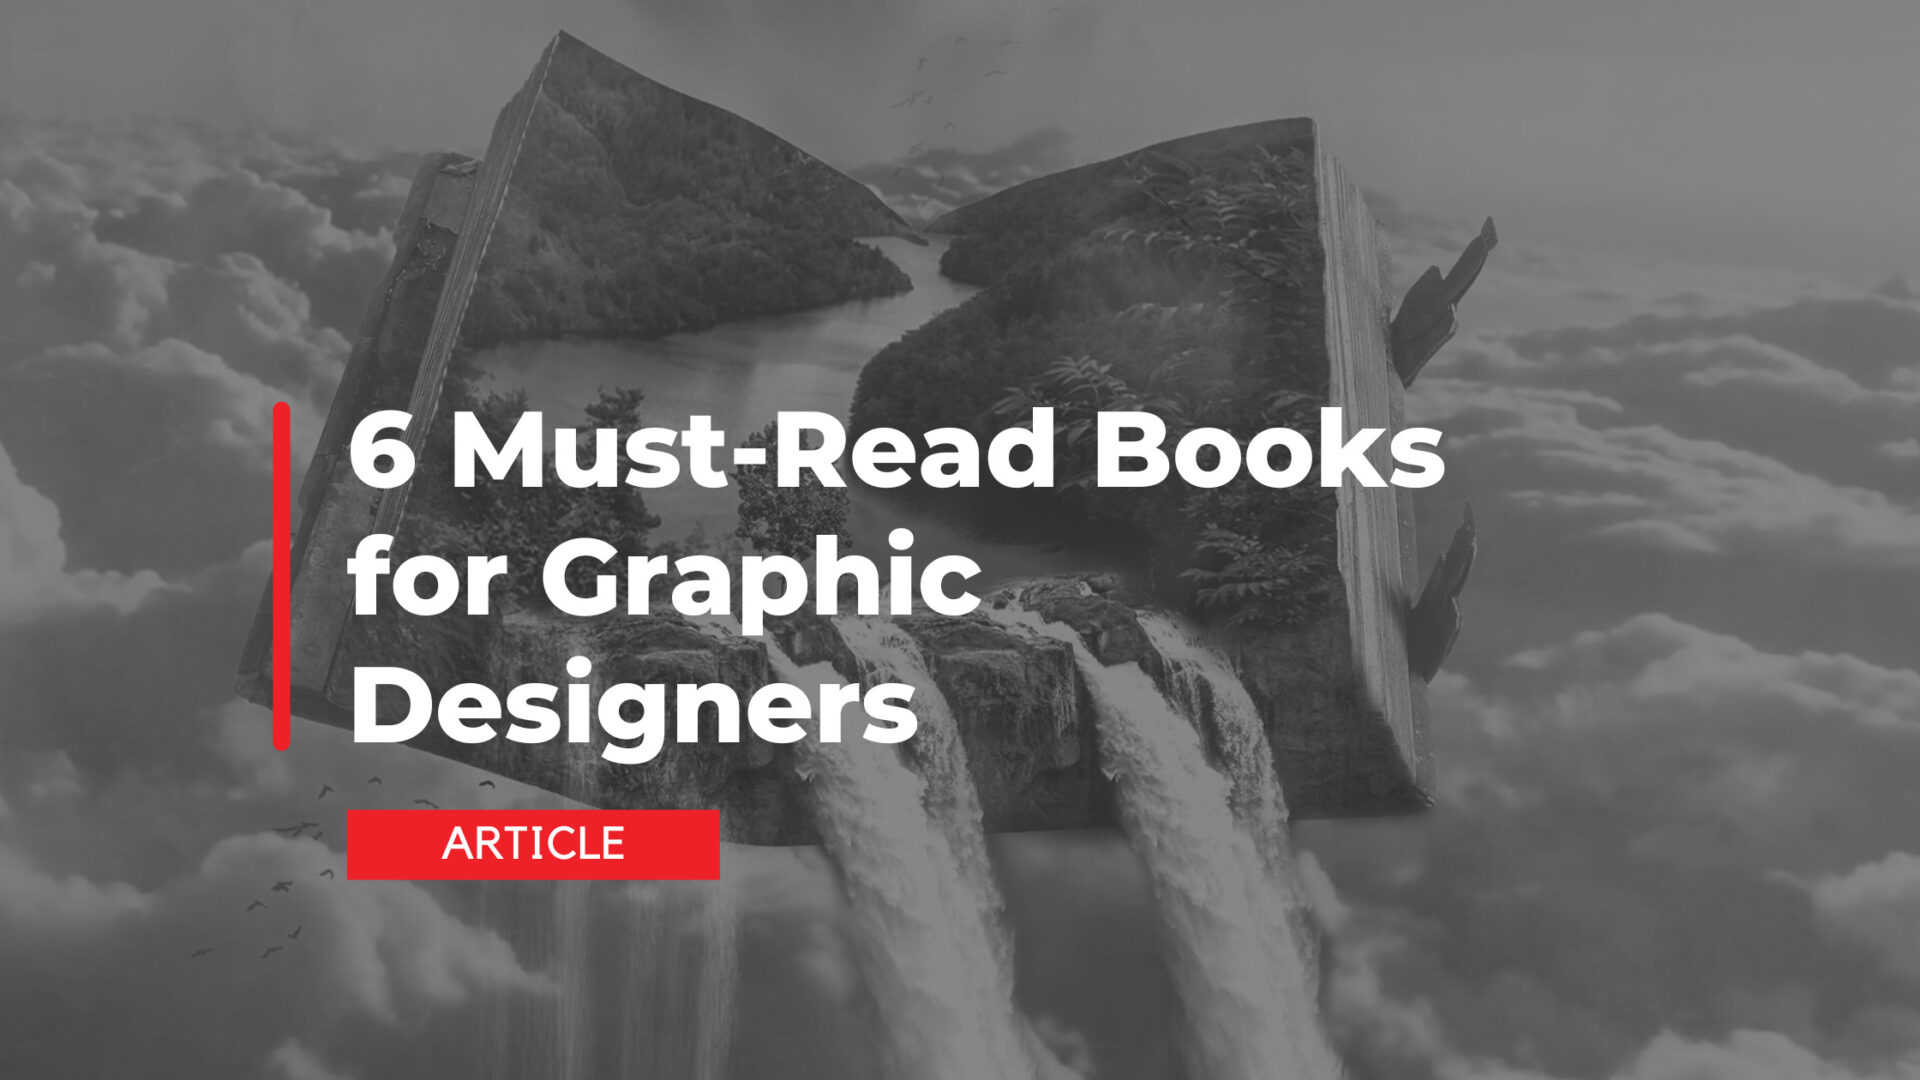 6 Must-Read Books for Graphic Designers